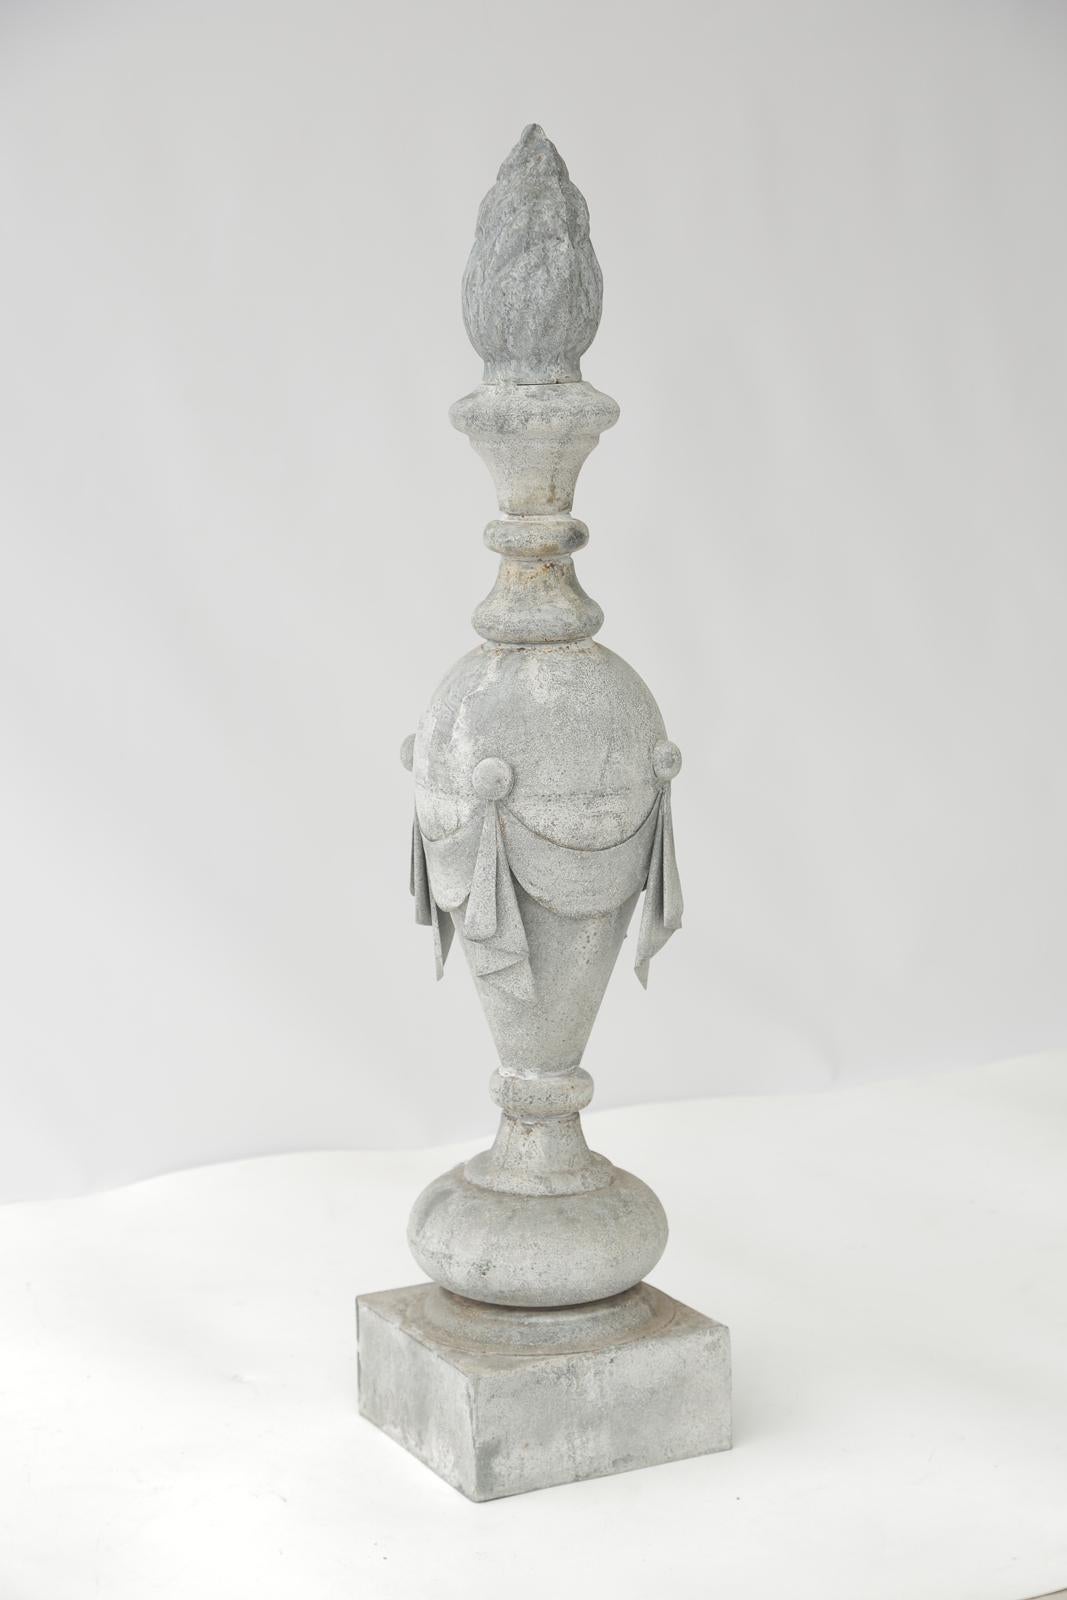 Pair of zinc decorative building finials, each fashioned as a draped flaming urn, in baluster-form, on square plinth. 

Stock ID: D8647.